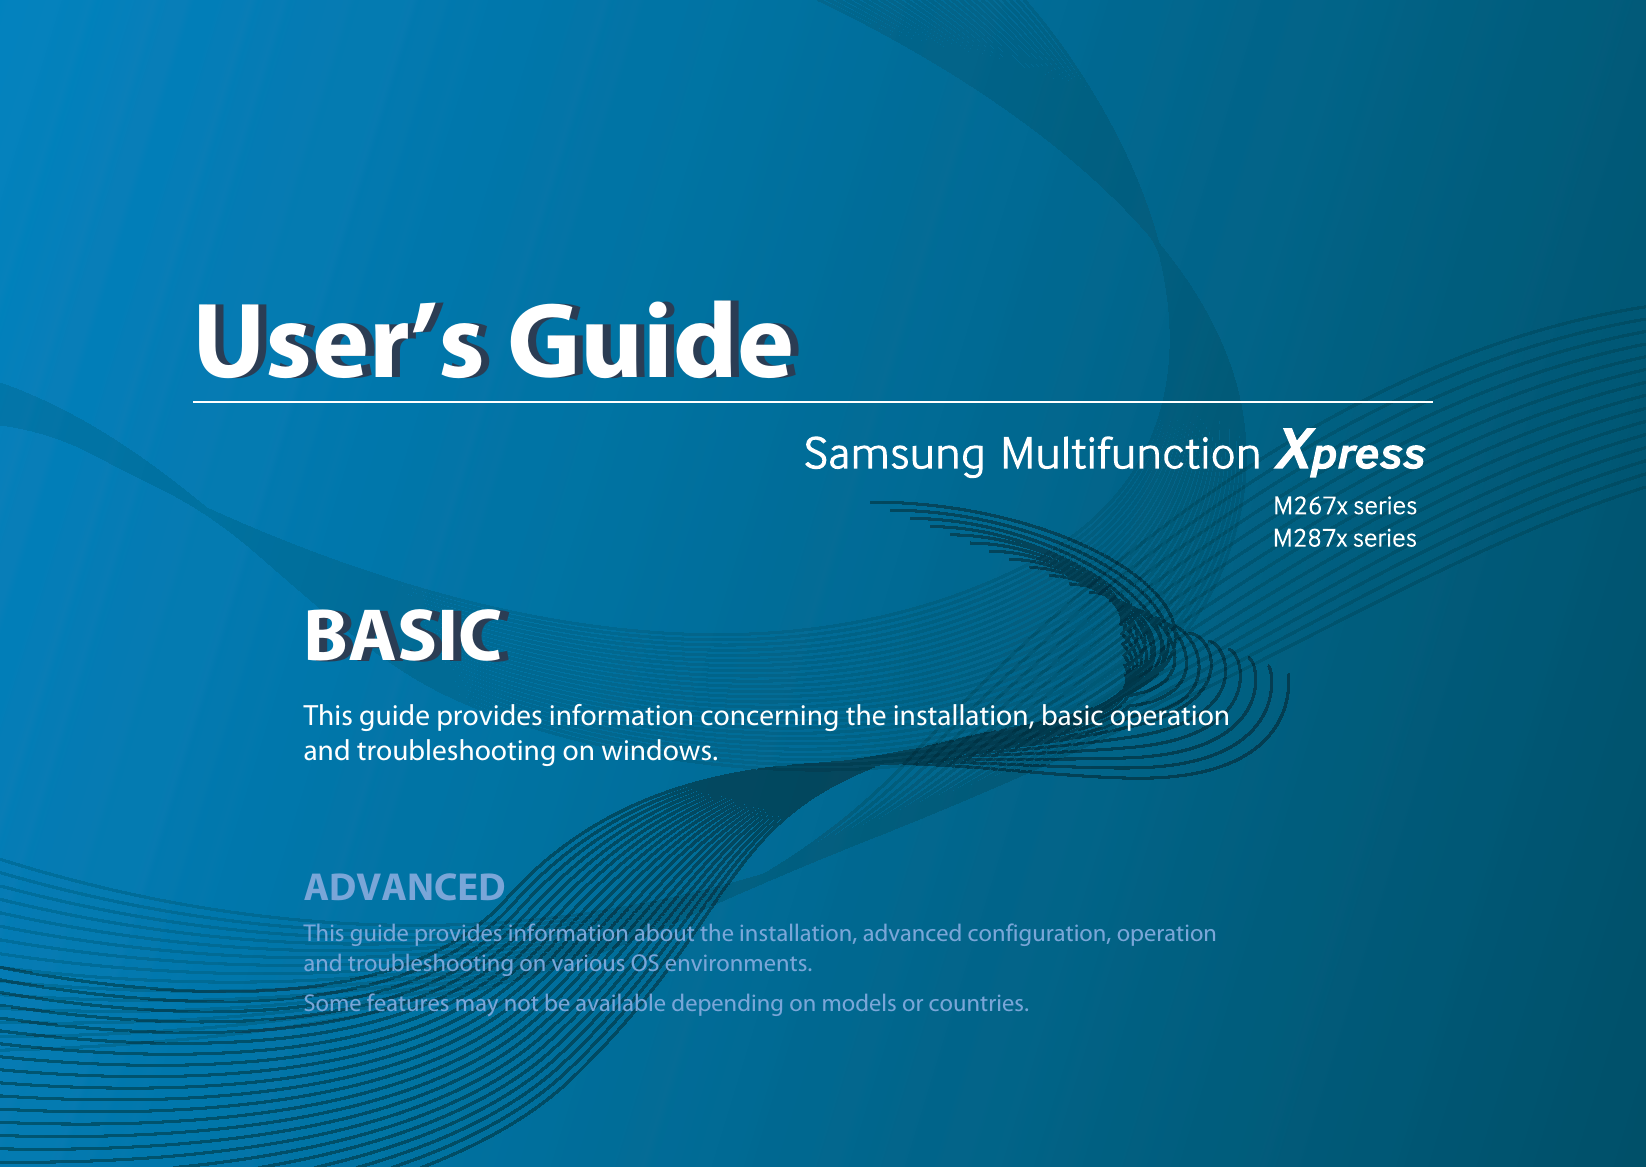 BASICUser’s GuideBASICUser’s GuideThis guide provides information concerning the installation, basic operation and troubleshooting on windows.ADVANCEDThis guide provides information about the installation, advanced configuration, operation and troubleshooting on various OS environments. Some features may not be available depending on models or countries.